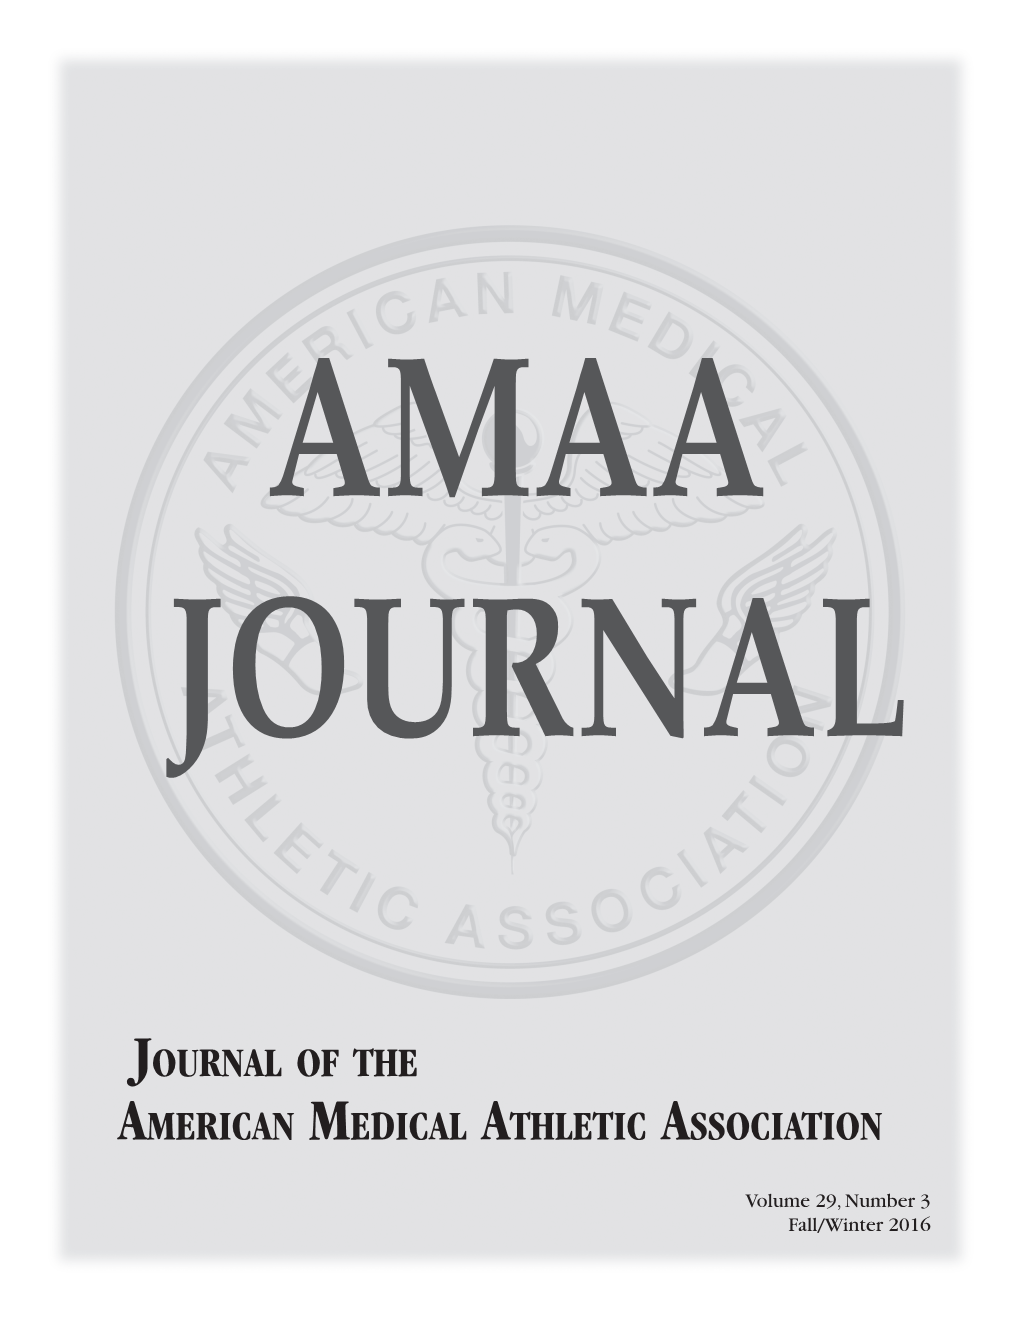 Journal of the American Medical Athletic Association